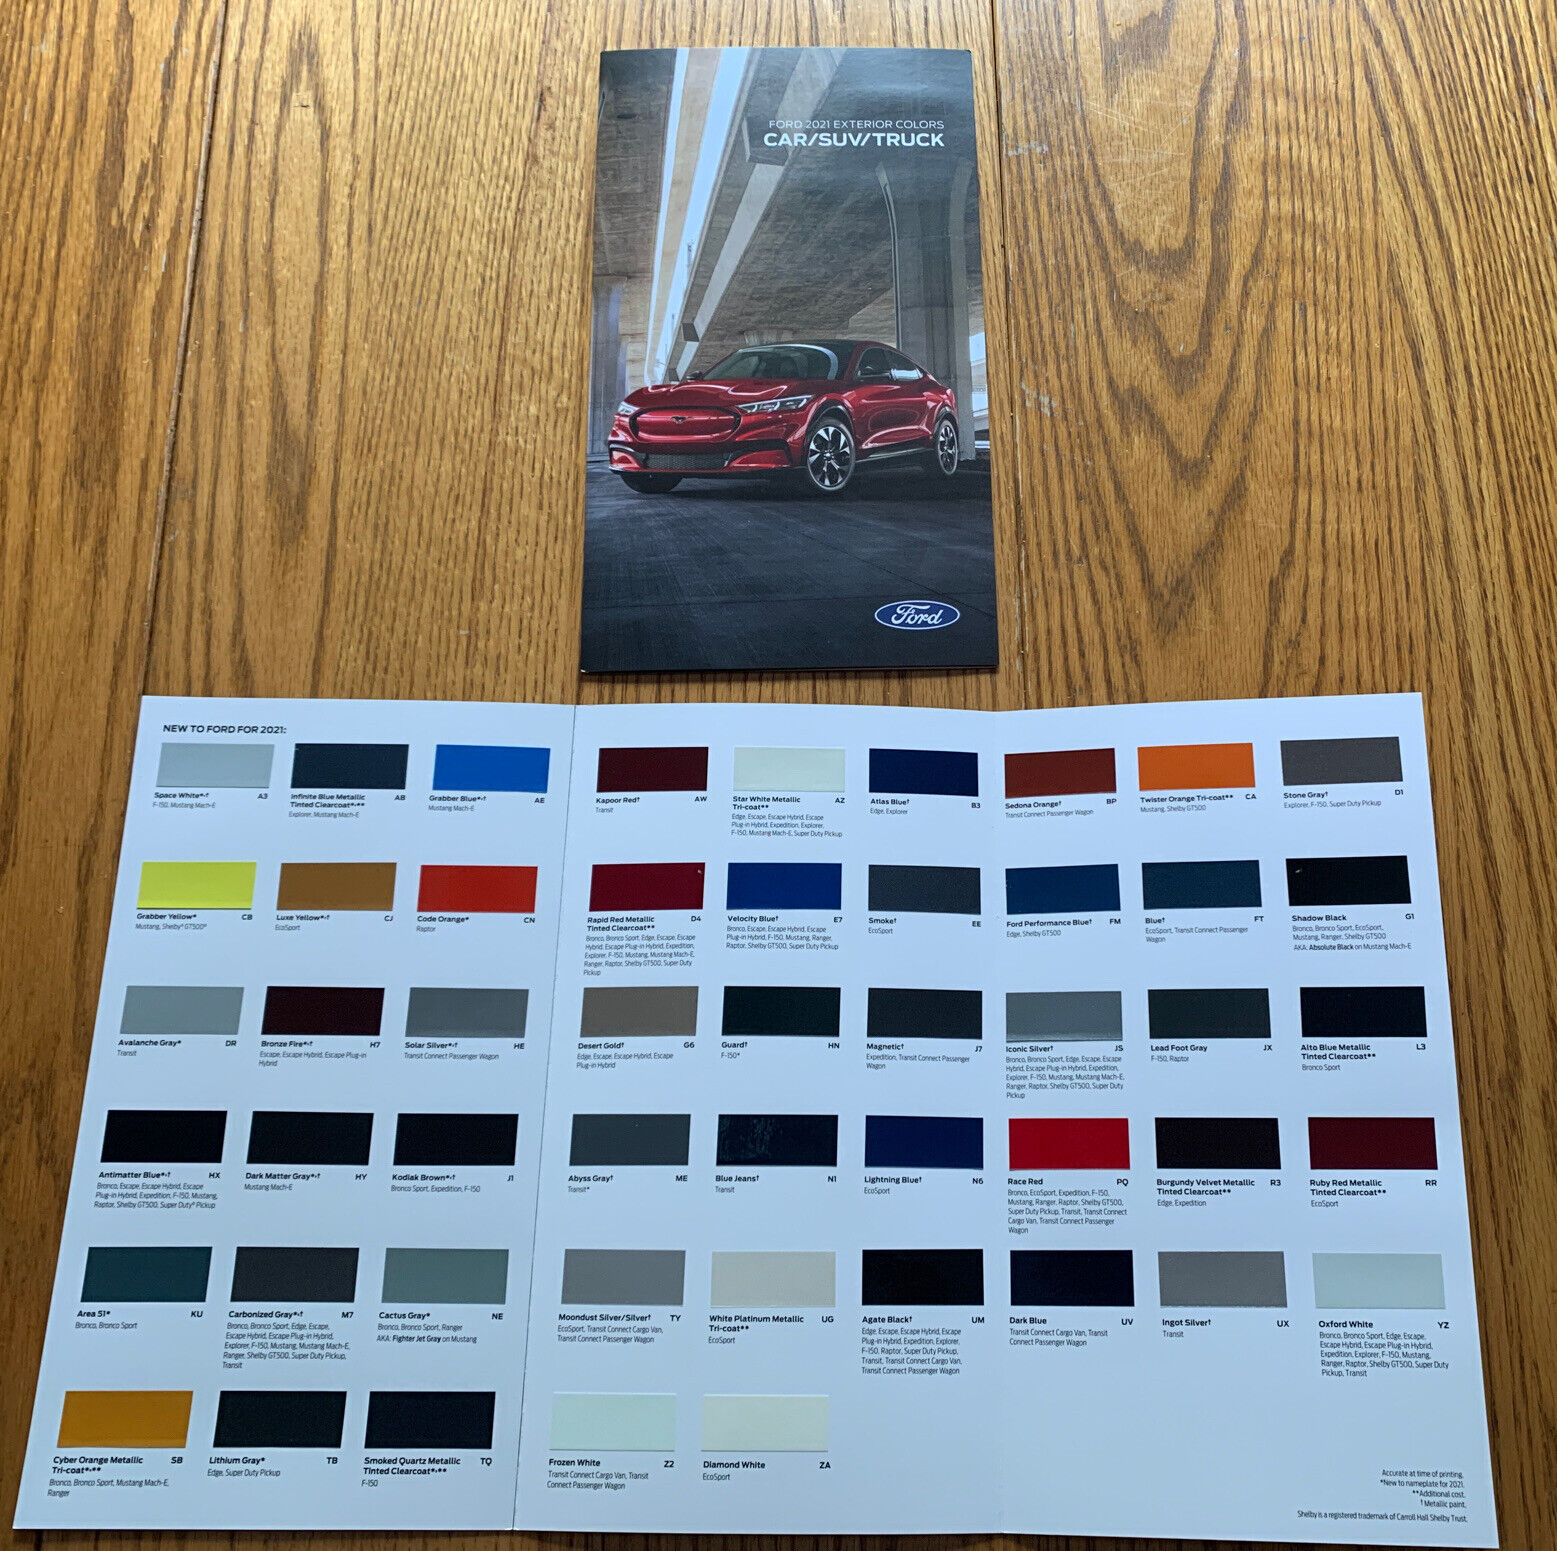 2021 Ford Color Chart - 2021 Ford Truck Color Chart - 2021 Ford Car Color Chart